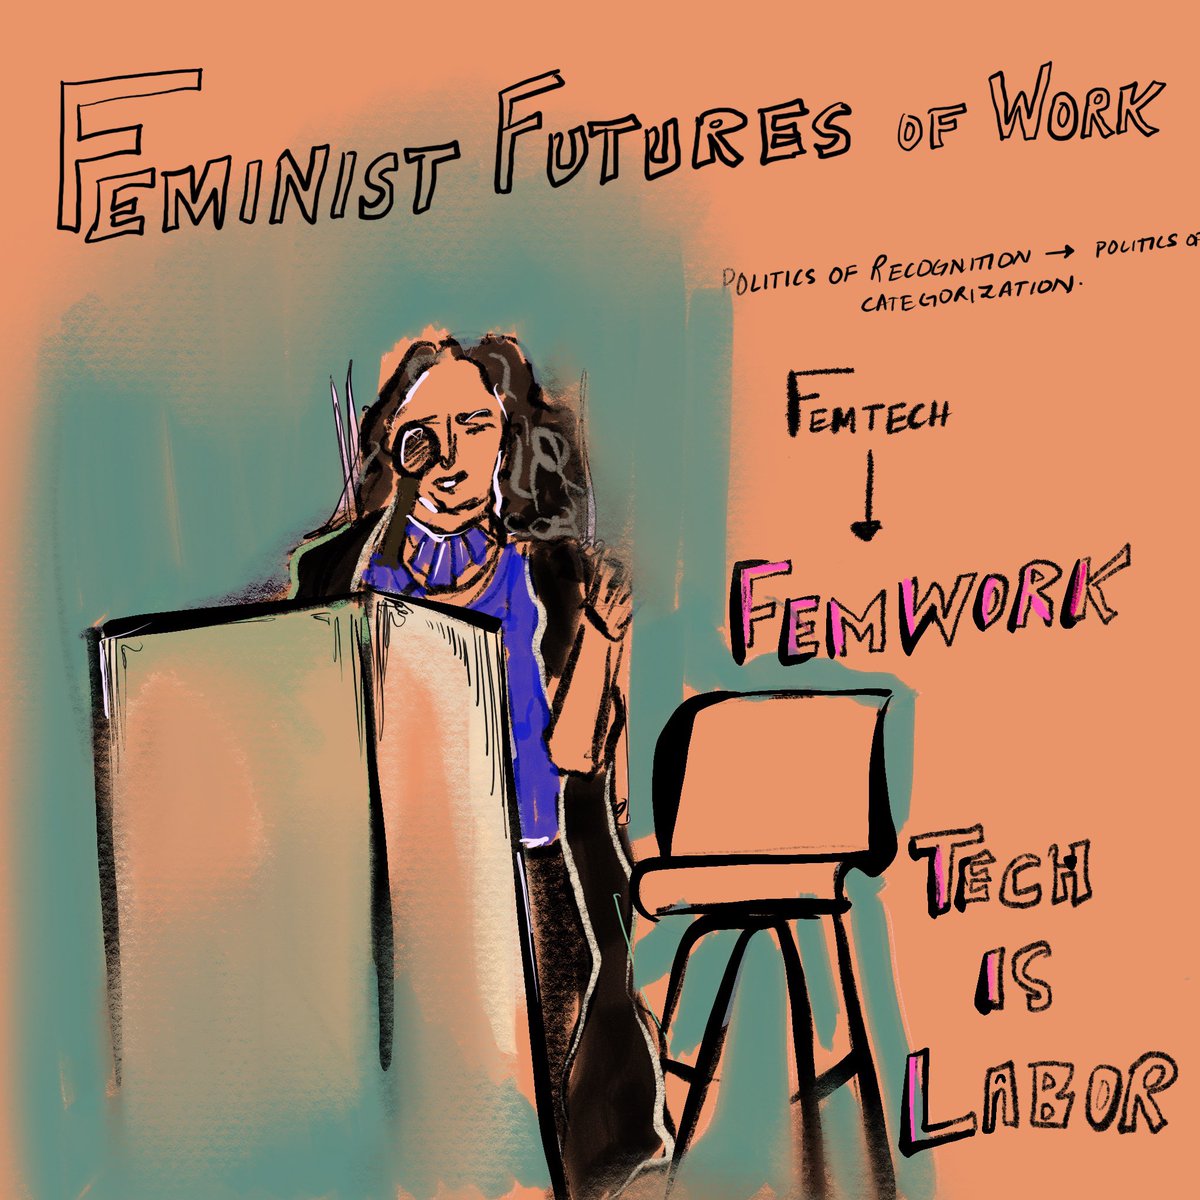 Keynote 5 @FAccTConference “Femtech IS FemWork” @3Lmantra, so thrilled about all the impactful work folks part of the Femlab Intitative have been up to. @FemlabC